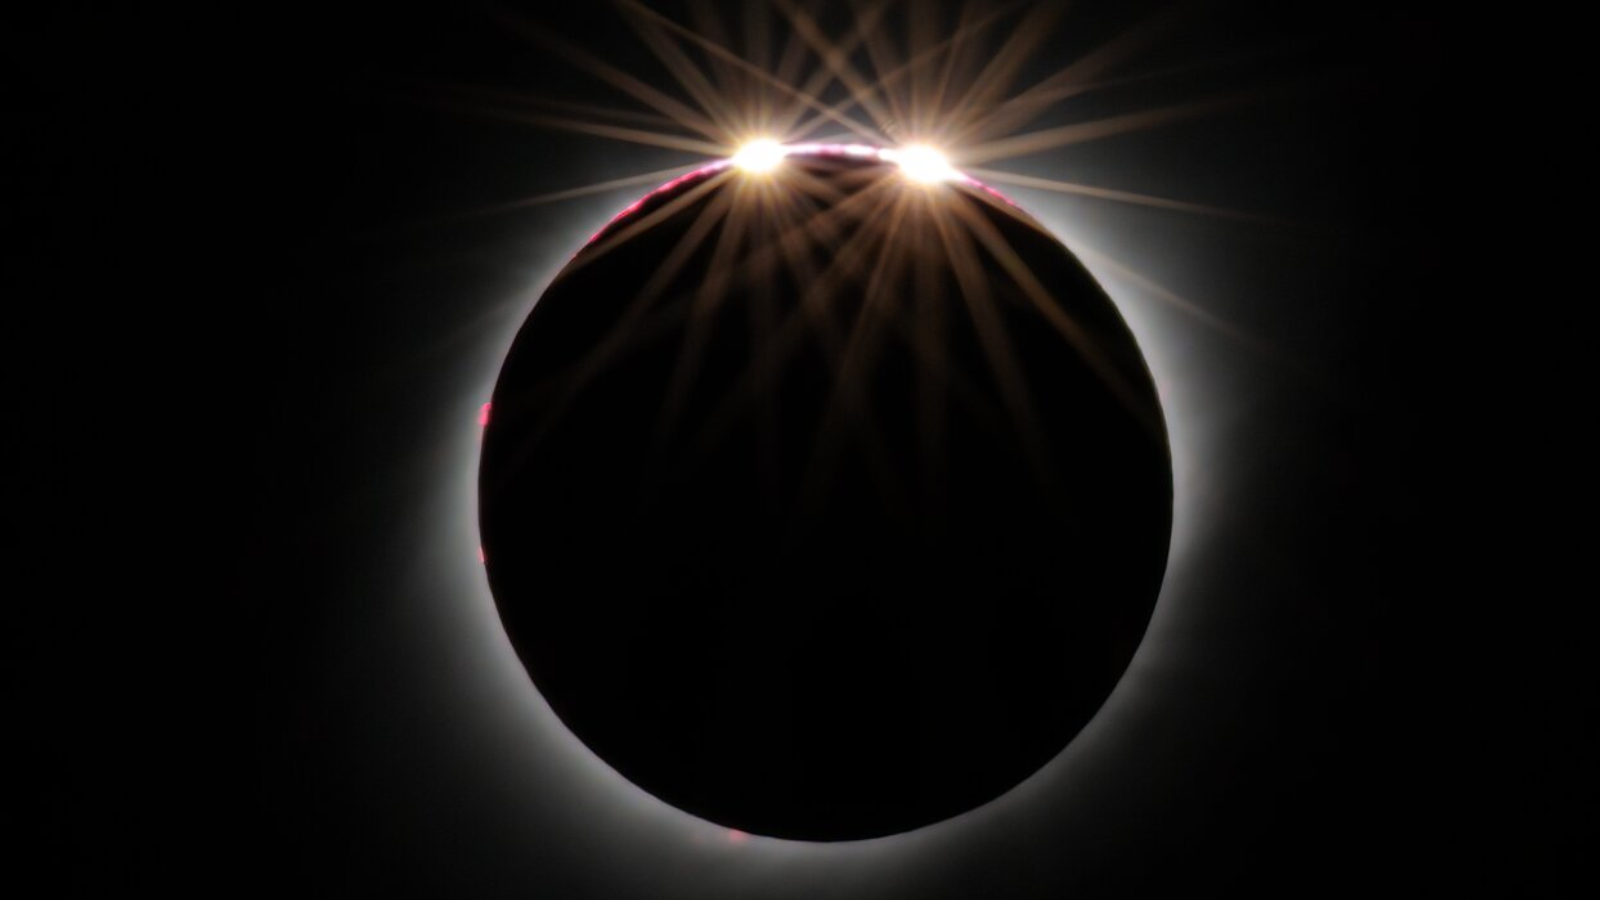 The April 8 solar eclipse will bring weird sights, sounds and feelings